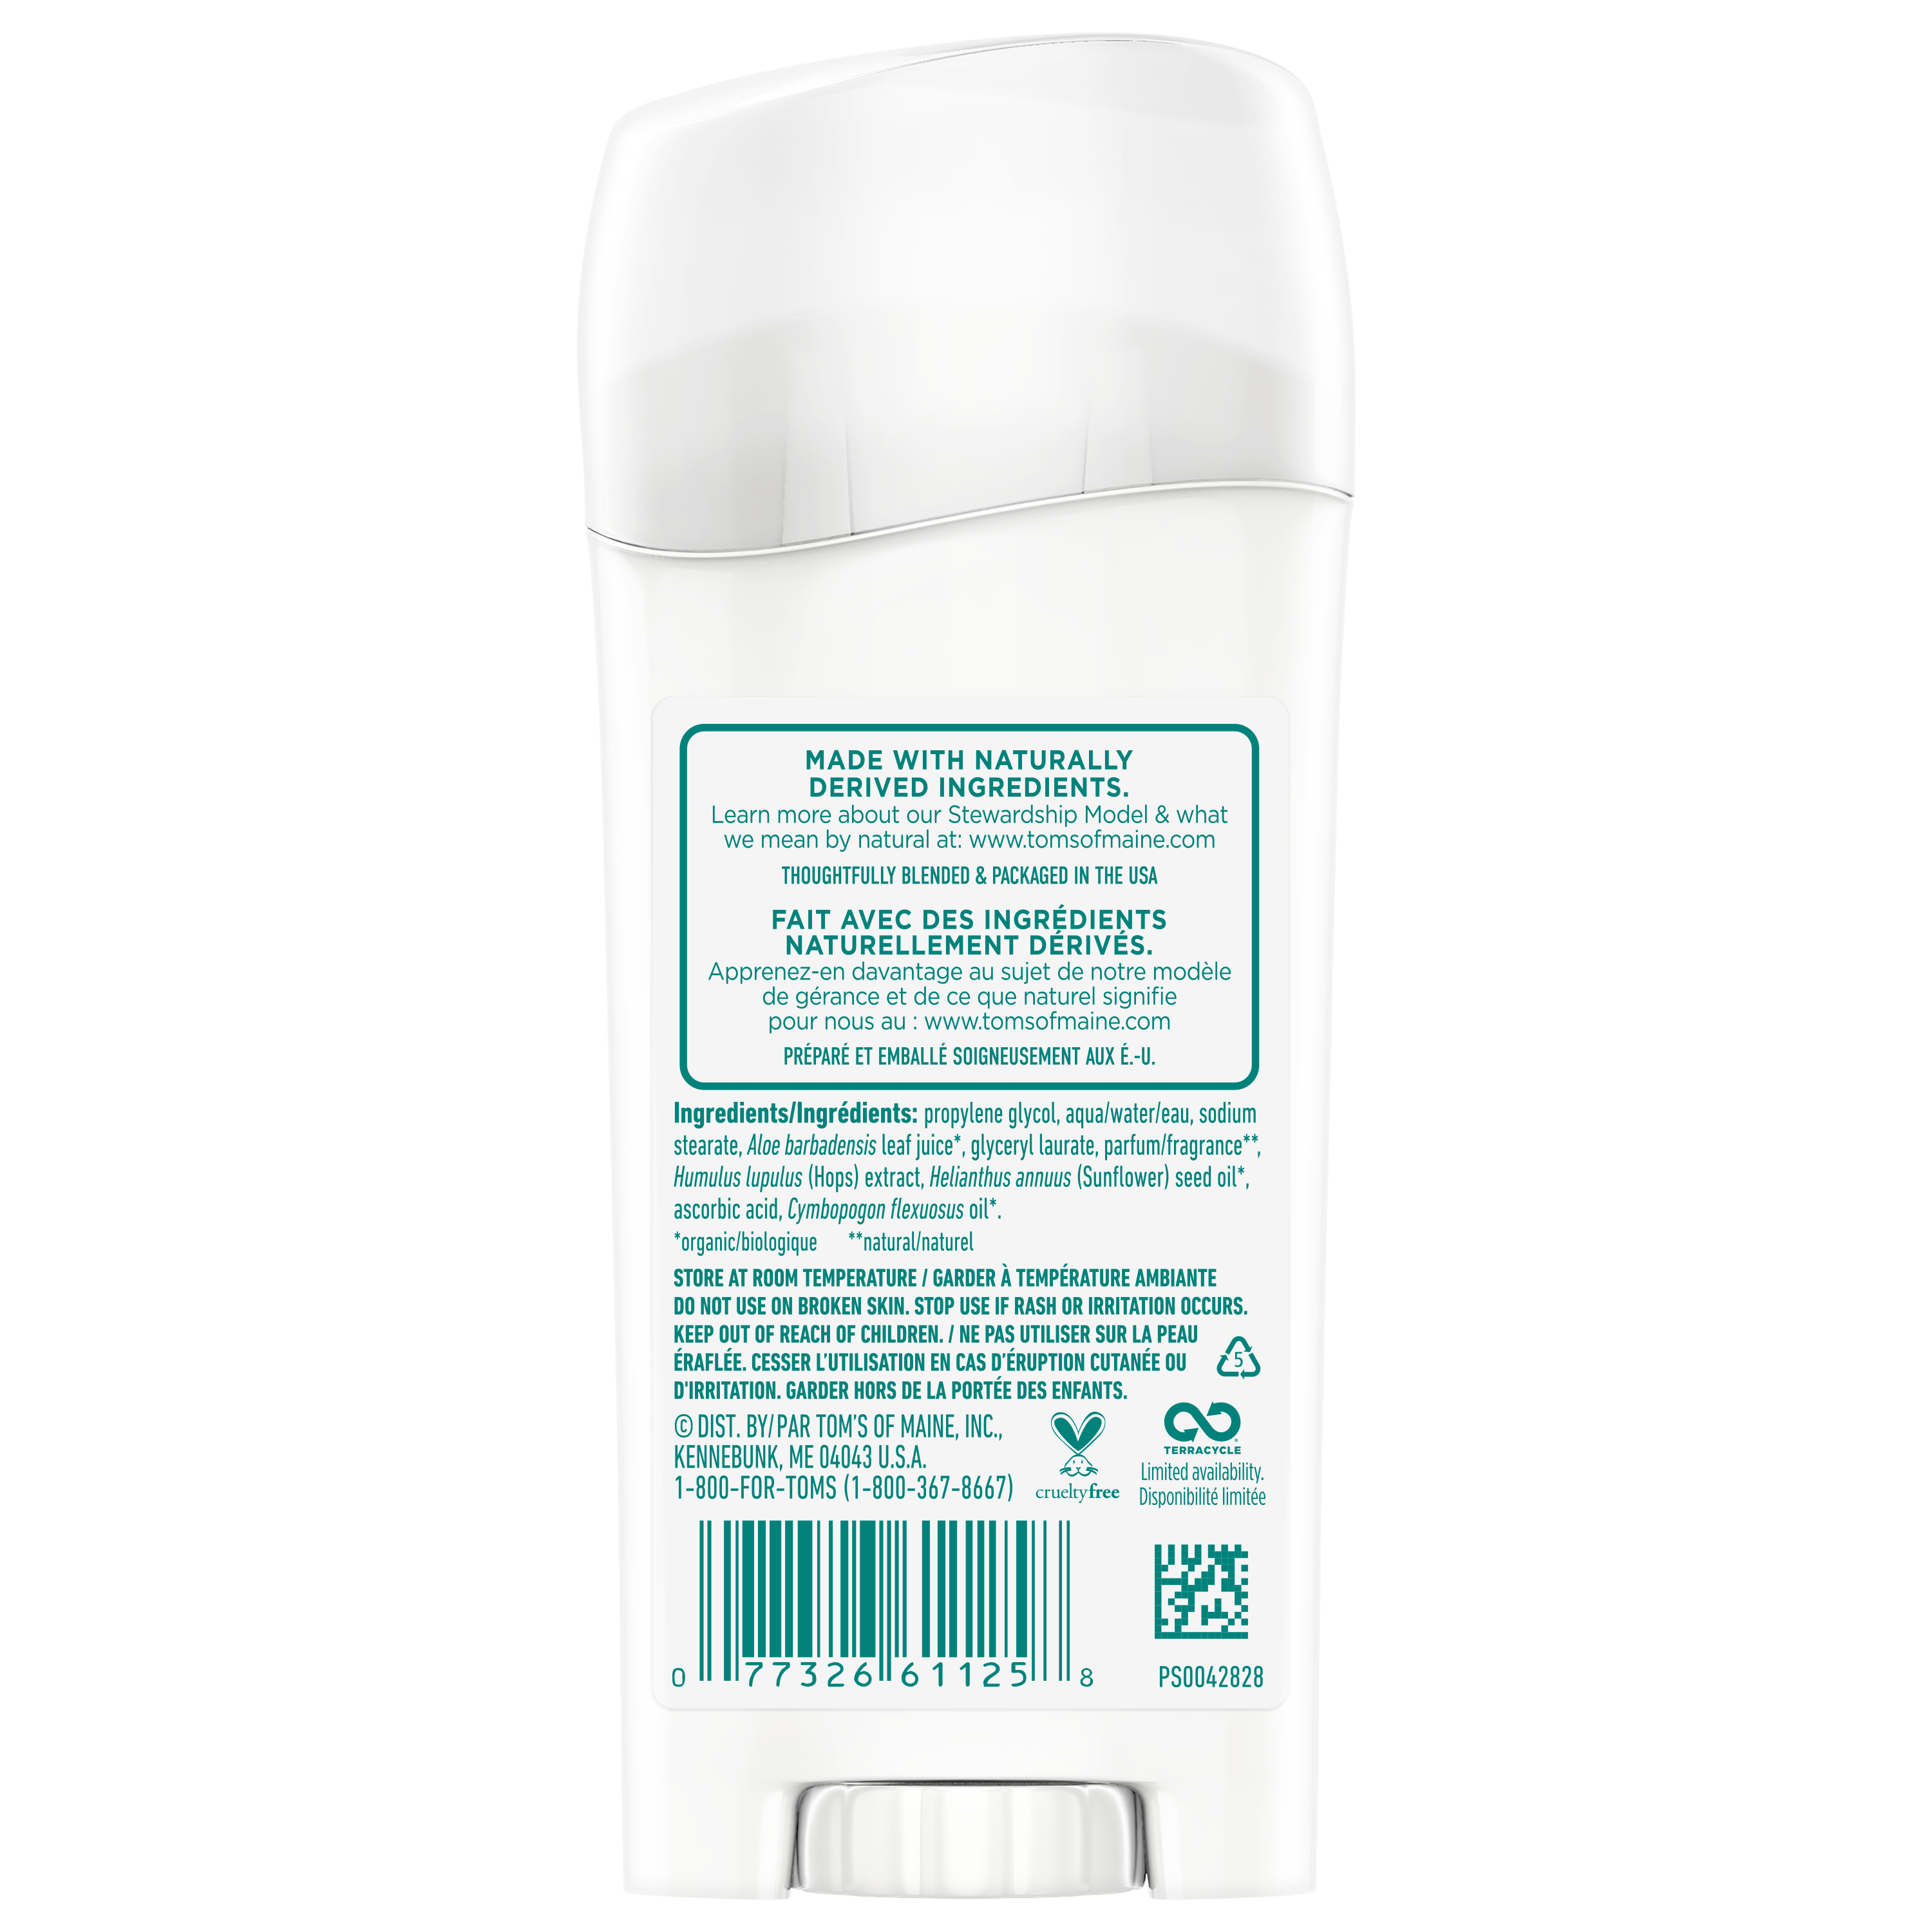 Tom's of Maine Long-Lasting Aluminum-Free Natural Deodorant for Women, Fresh Apricot, 2.25 oz - image 4 of 8